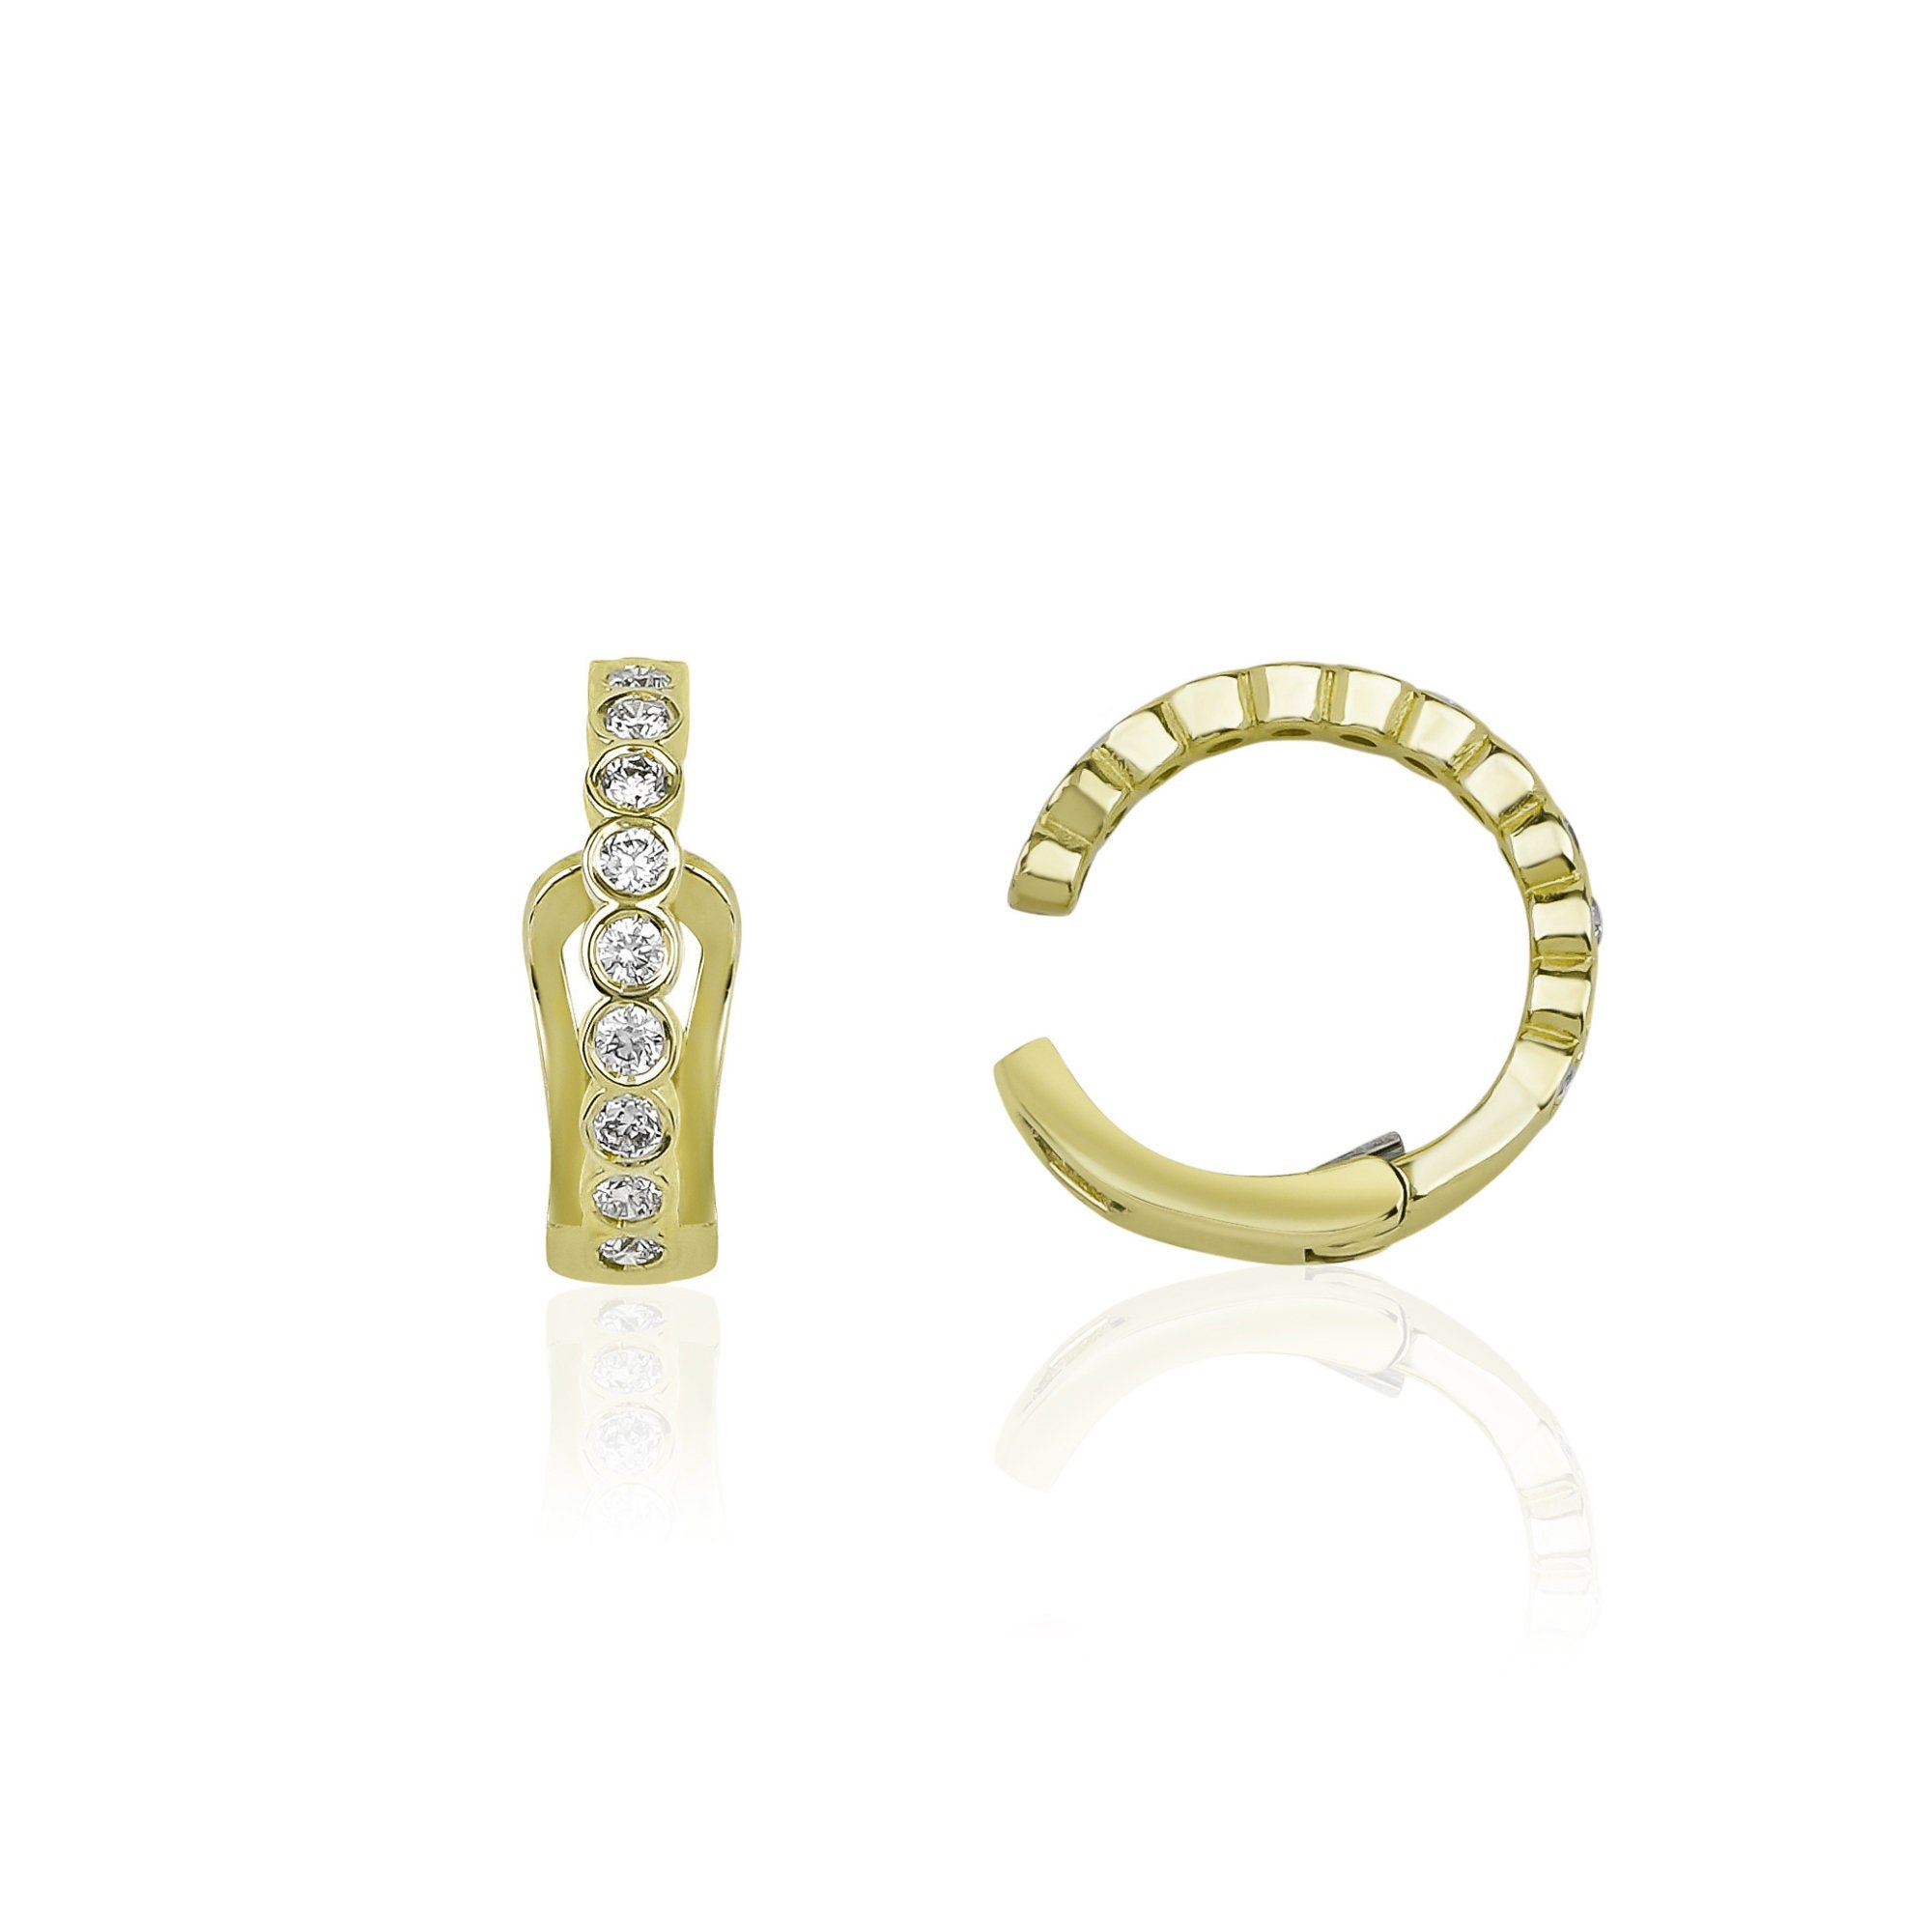 Bezel Set Diamond Ear Cuff Available in 14K and 18K Gold